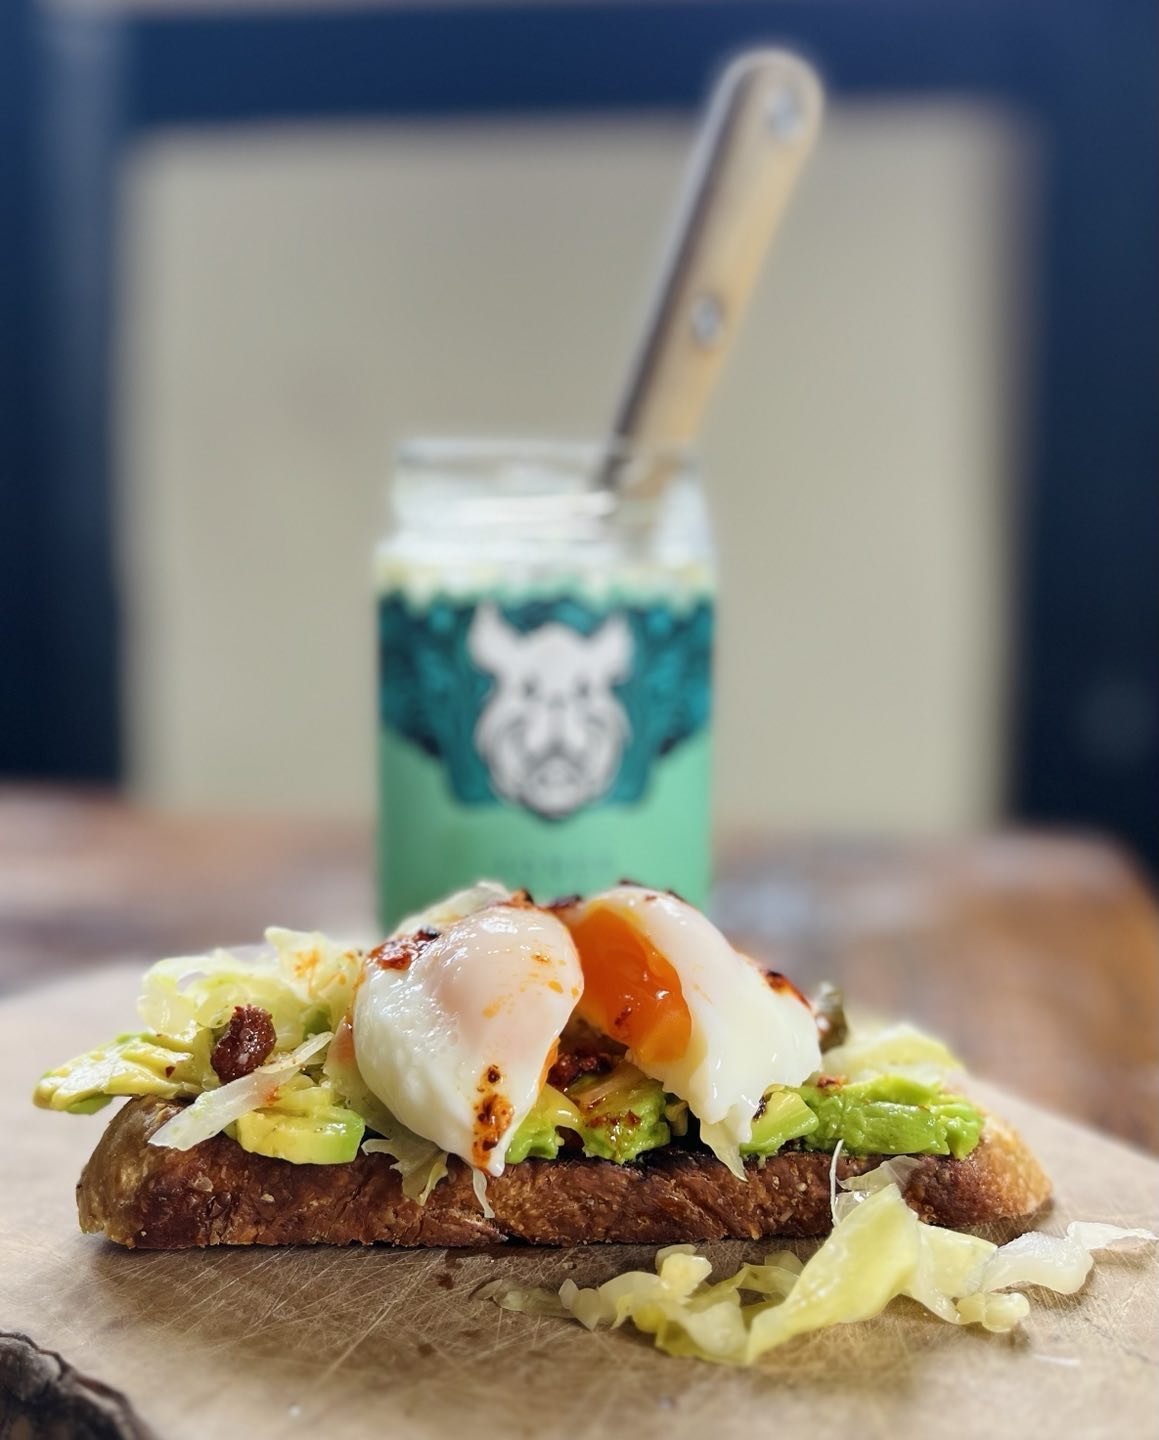 What&rsquo;s on your table this bank holiday weekend? 

#fermentedfood #sauerkraut #live #living #food #bankholiday #breakfast #delicious